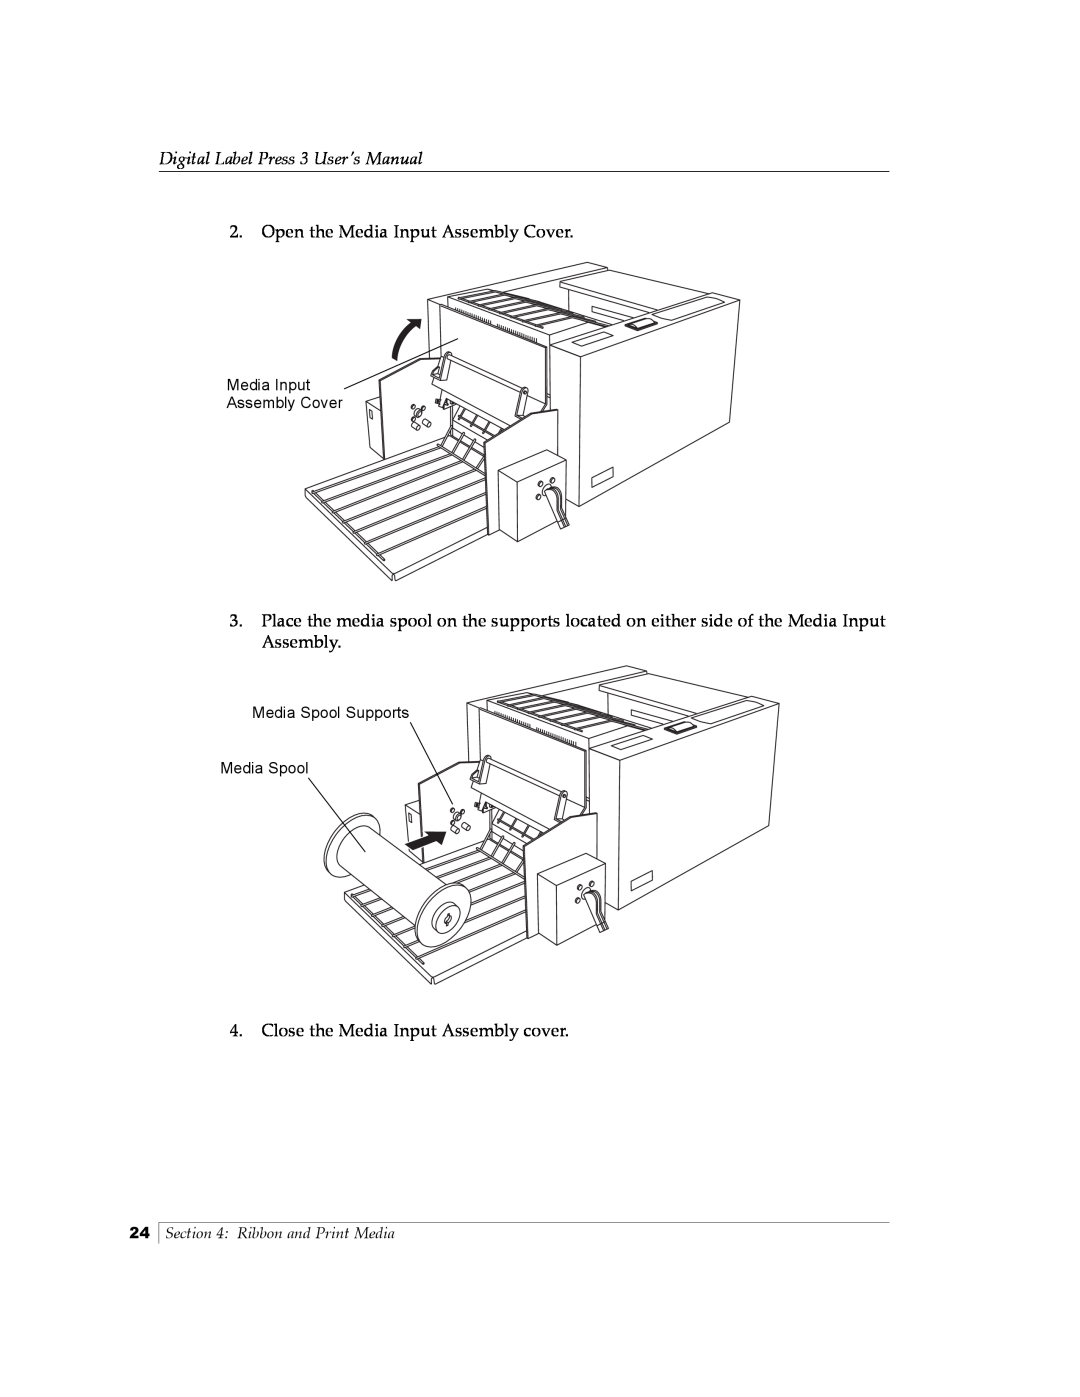 Primera Technology 510212 Digital Label Press 3 User’s Manual, Open the Media Input Assembly Cover, Ribbon and Print Media 